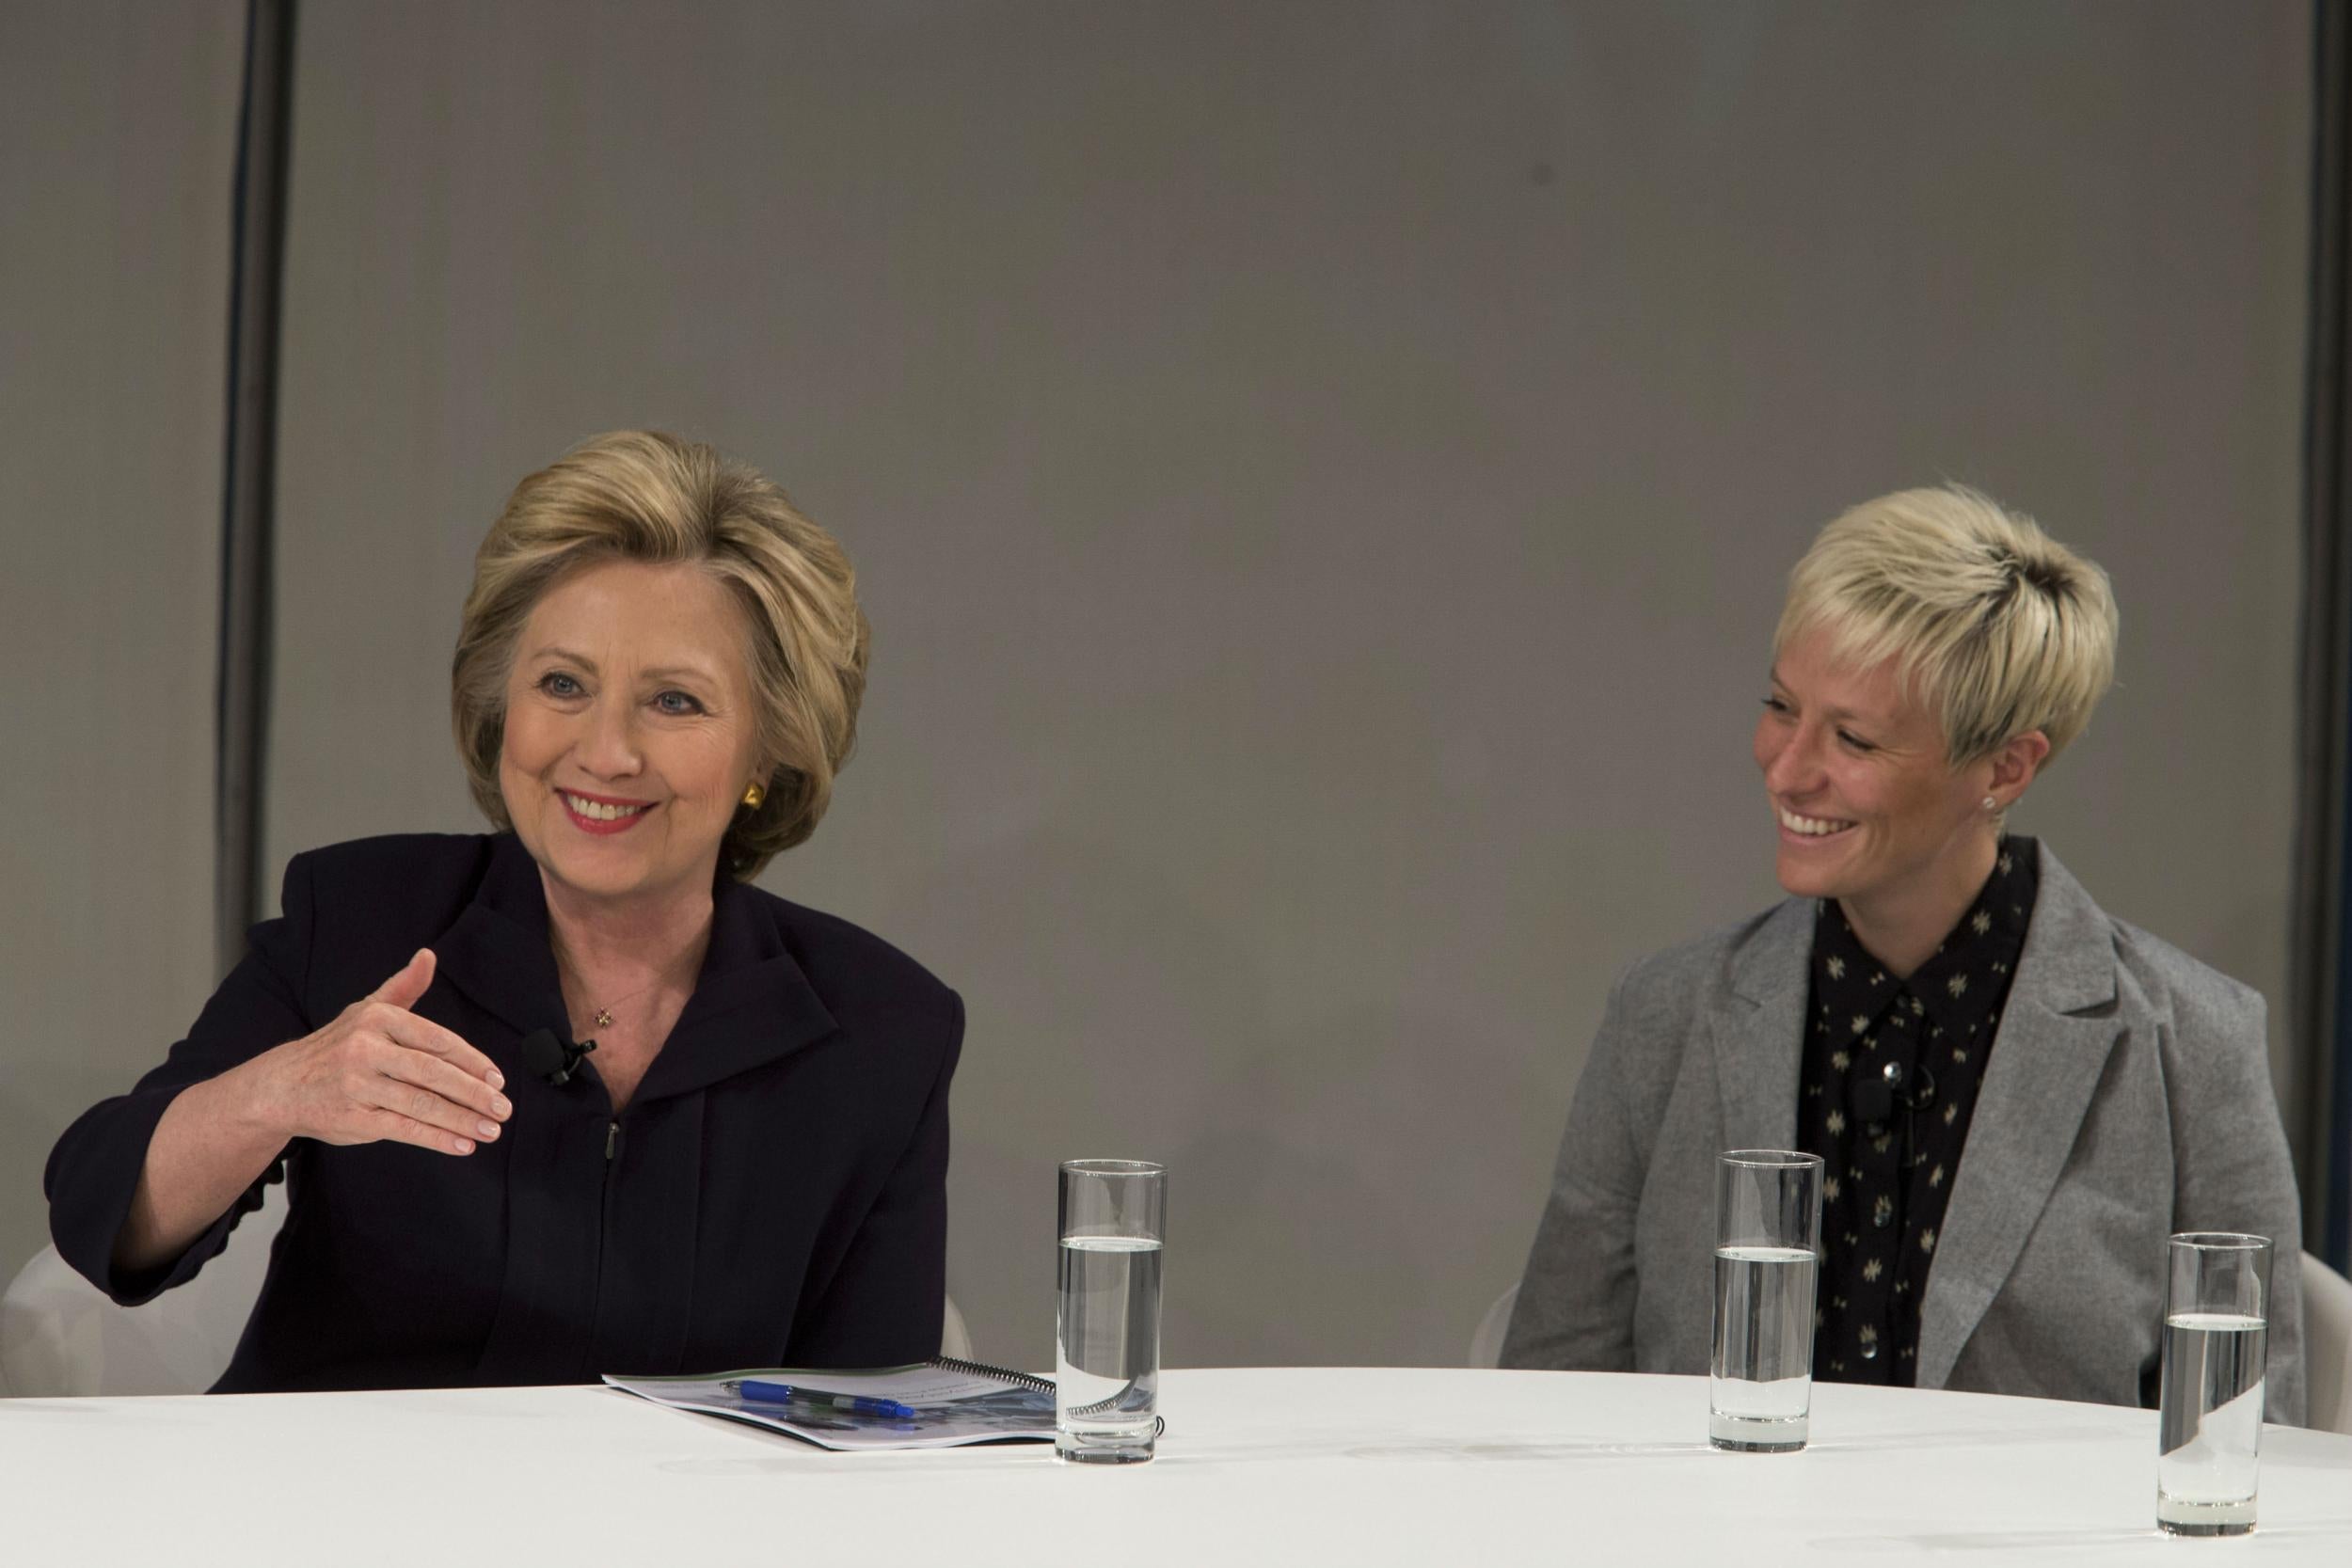 Hillary Clinton and athlete Megan Rapinoe discuss the gender pay gap